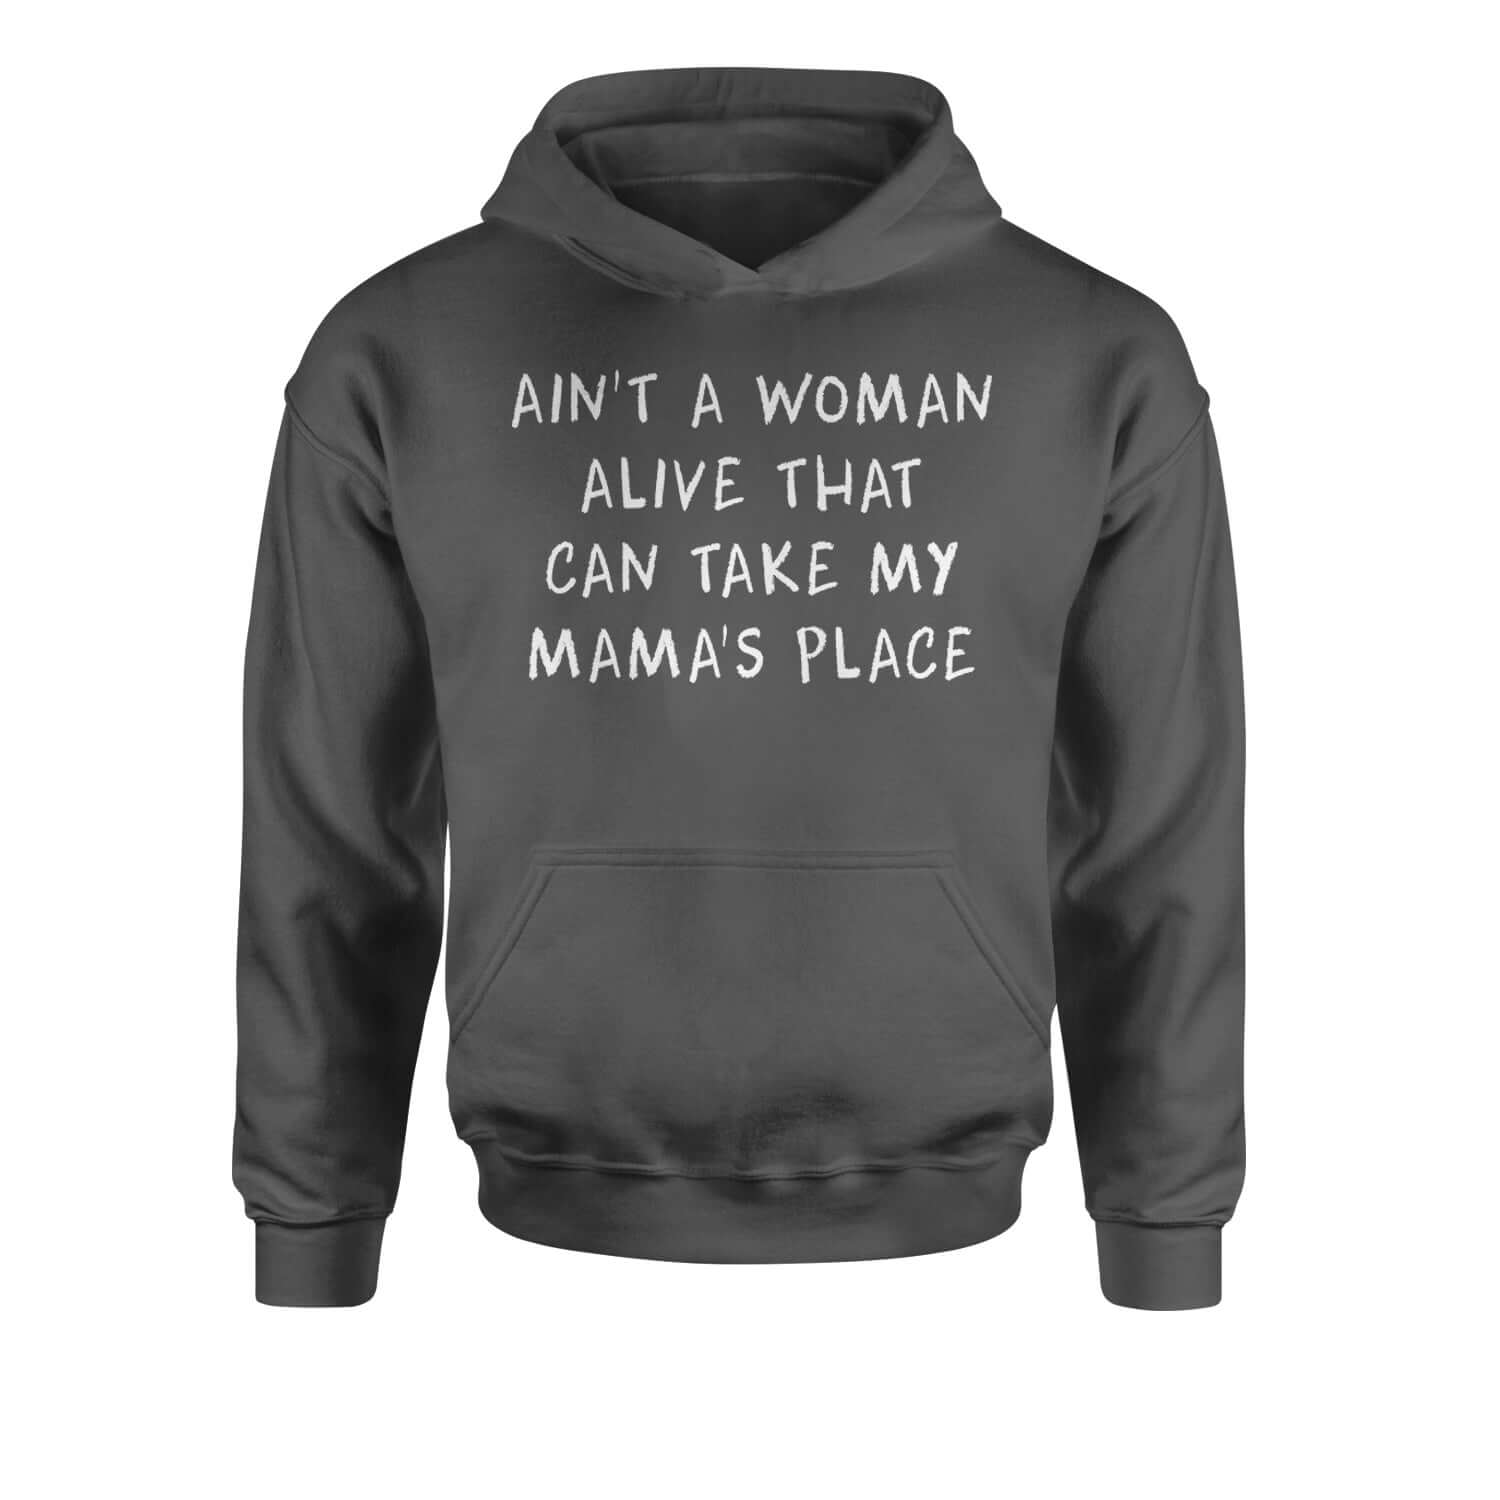 Ain't A Woman Alive That Can Take My Mama's Place Youth-Sized Hoodie 2pac, bear, day, mama, mom, mothers, shakur, tupac by Expression Tees